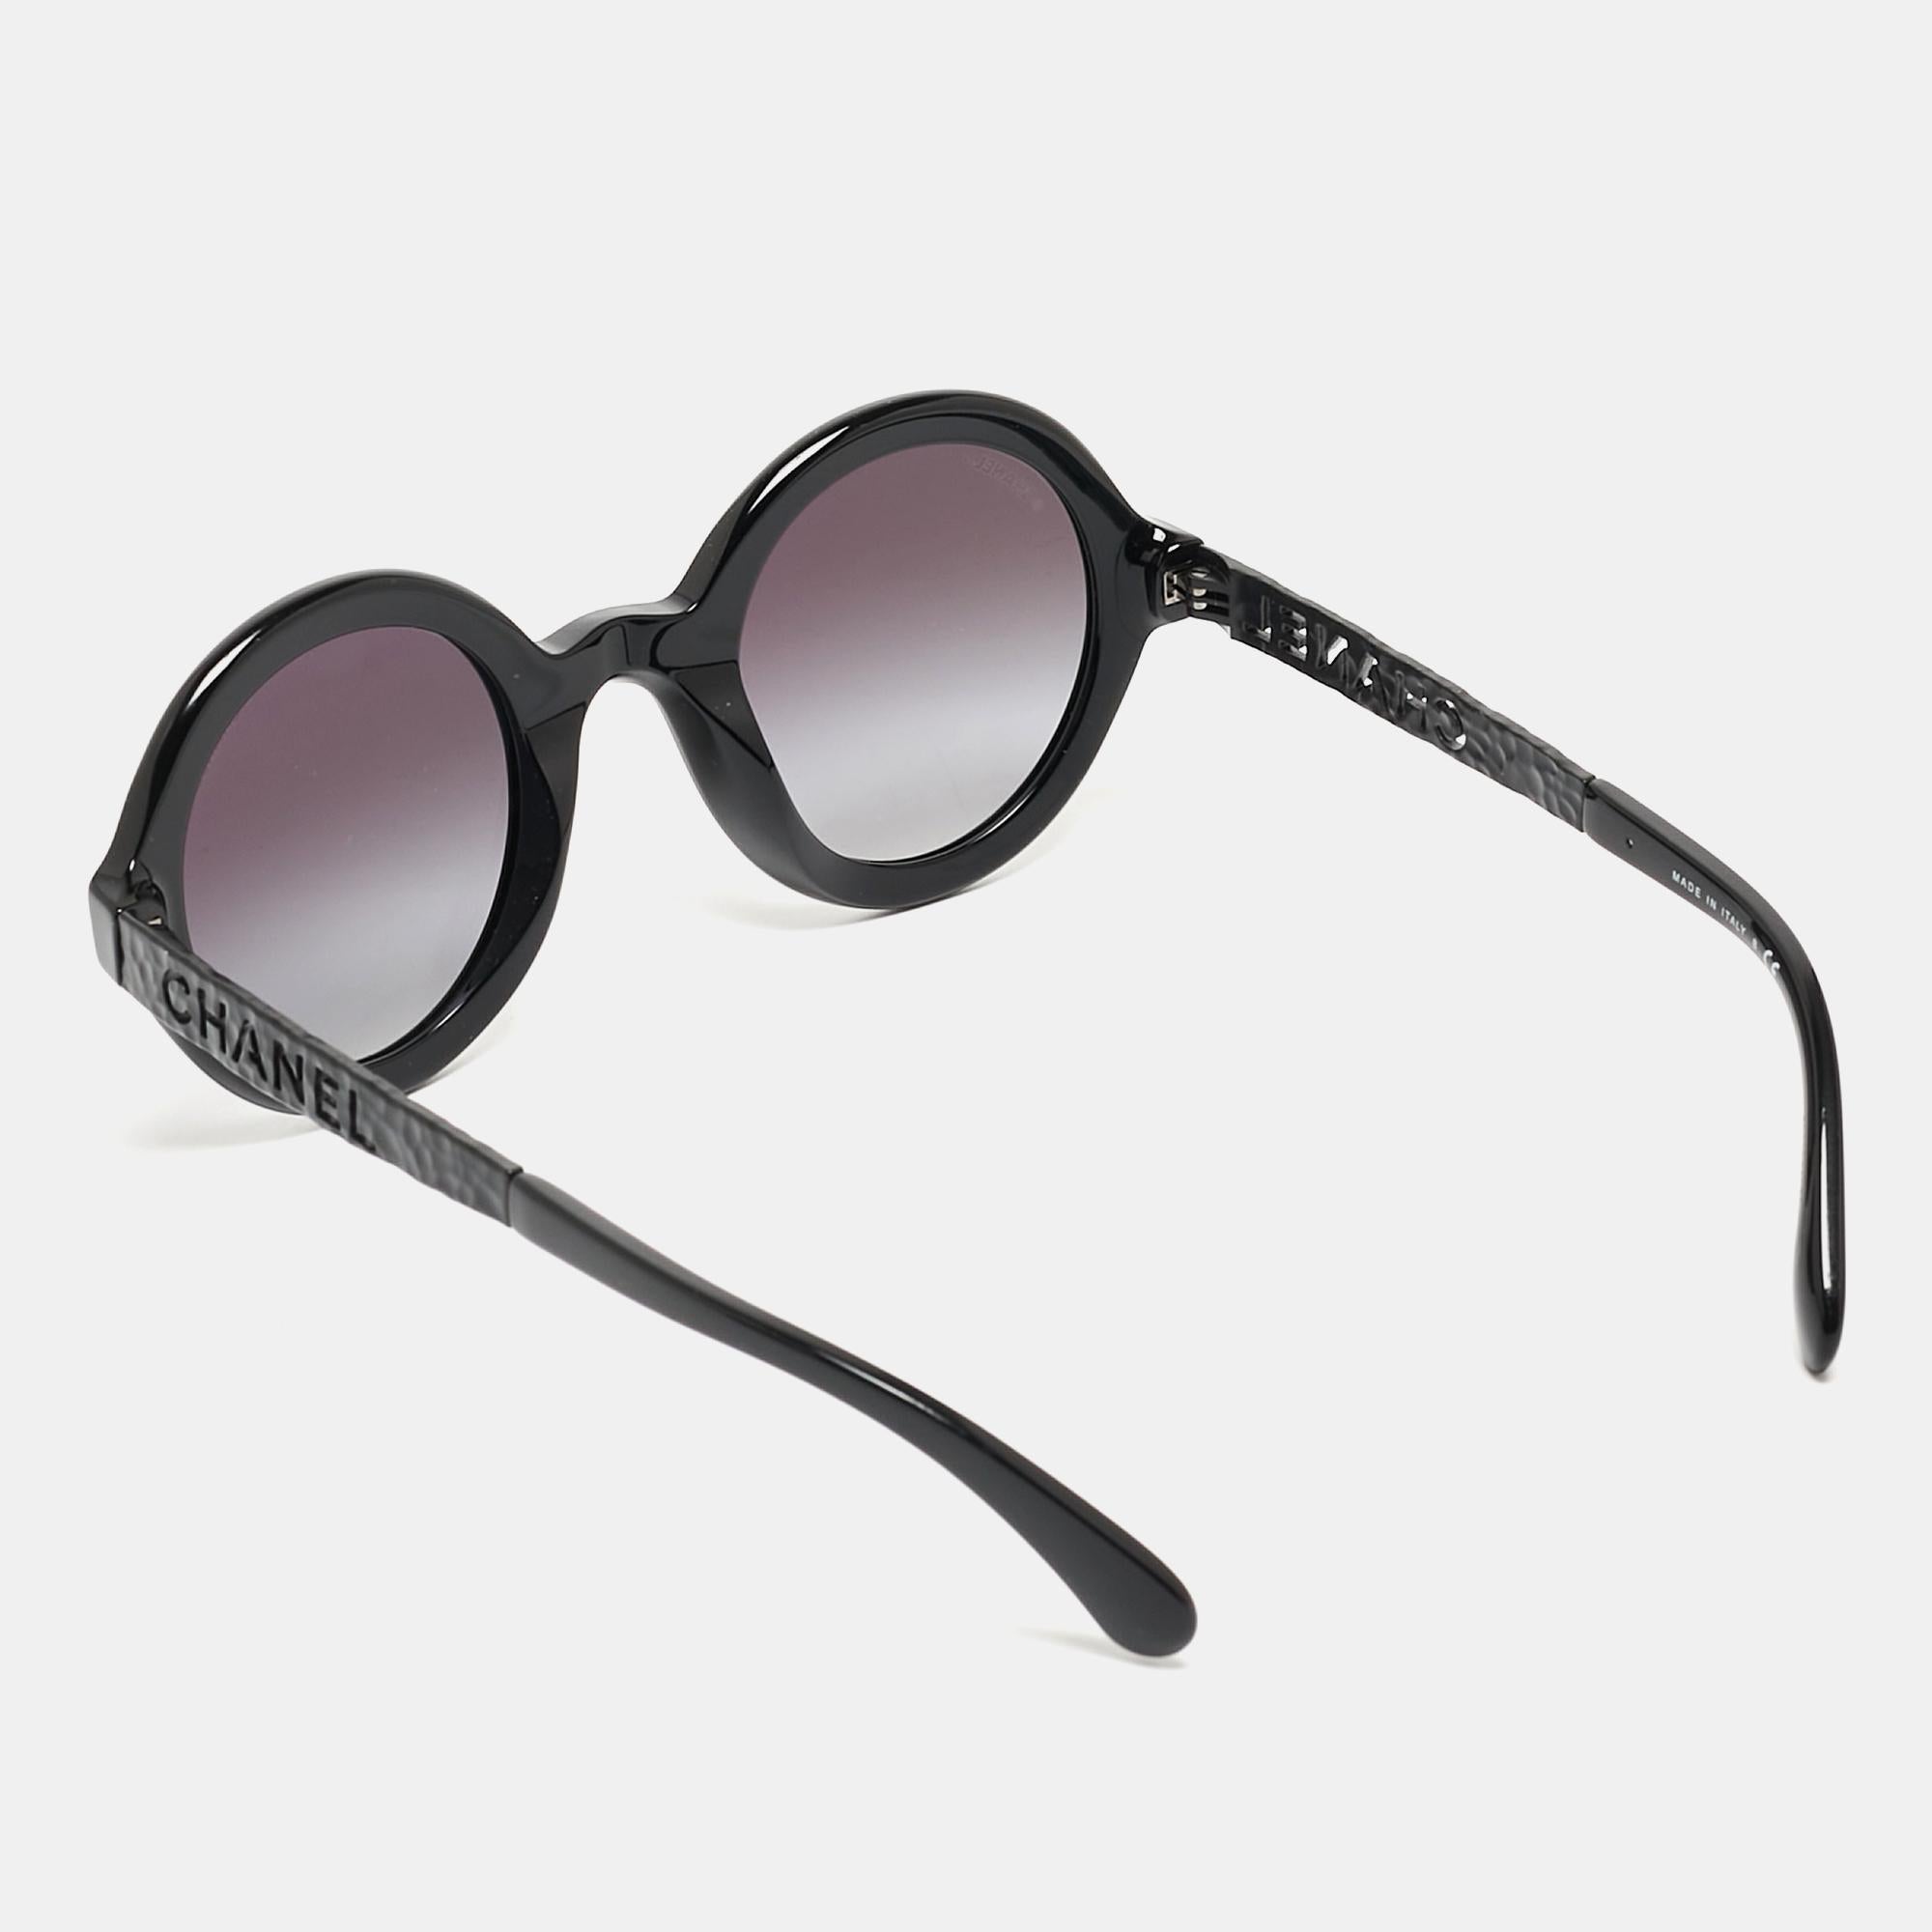 Elevate your eyewear game with these Chanel round sunglasses for women. Meticulously crafted from premium materials, they offer unparalleled protection and a timeless design, making them a must-have accessory for the fashion-forward.

Includes: